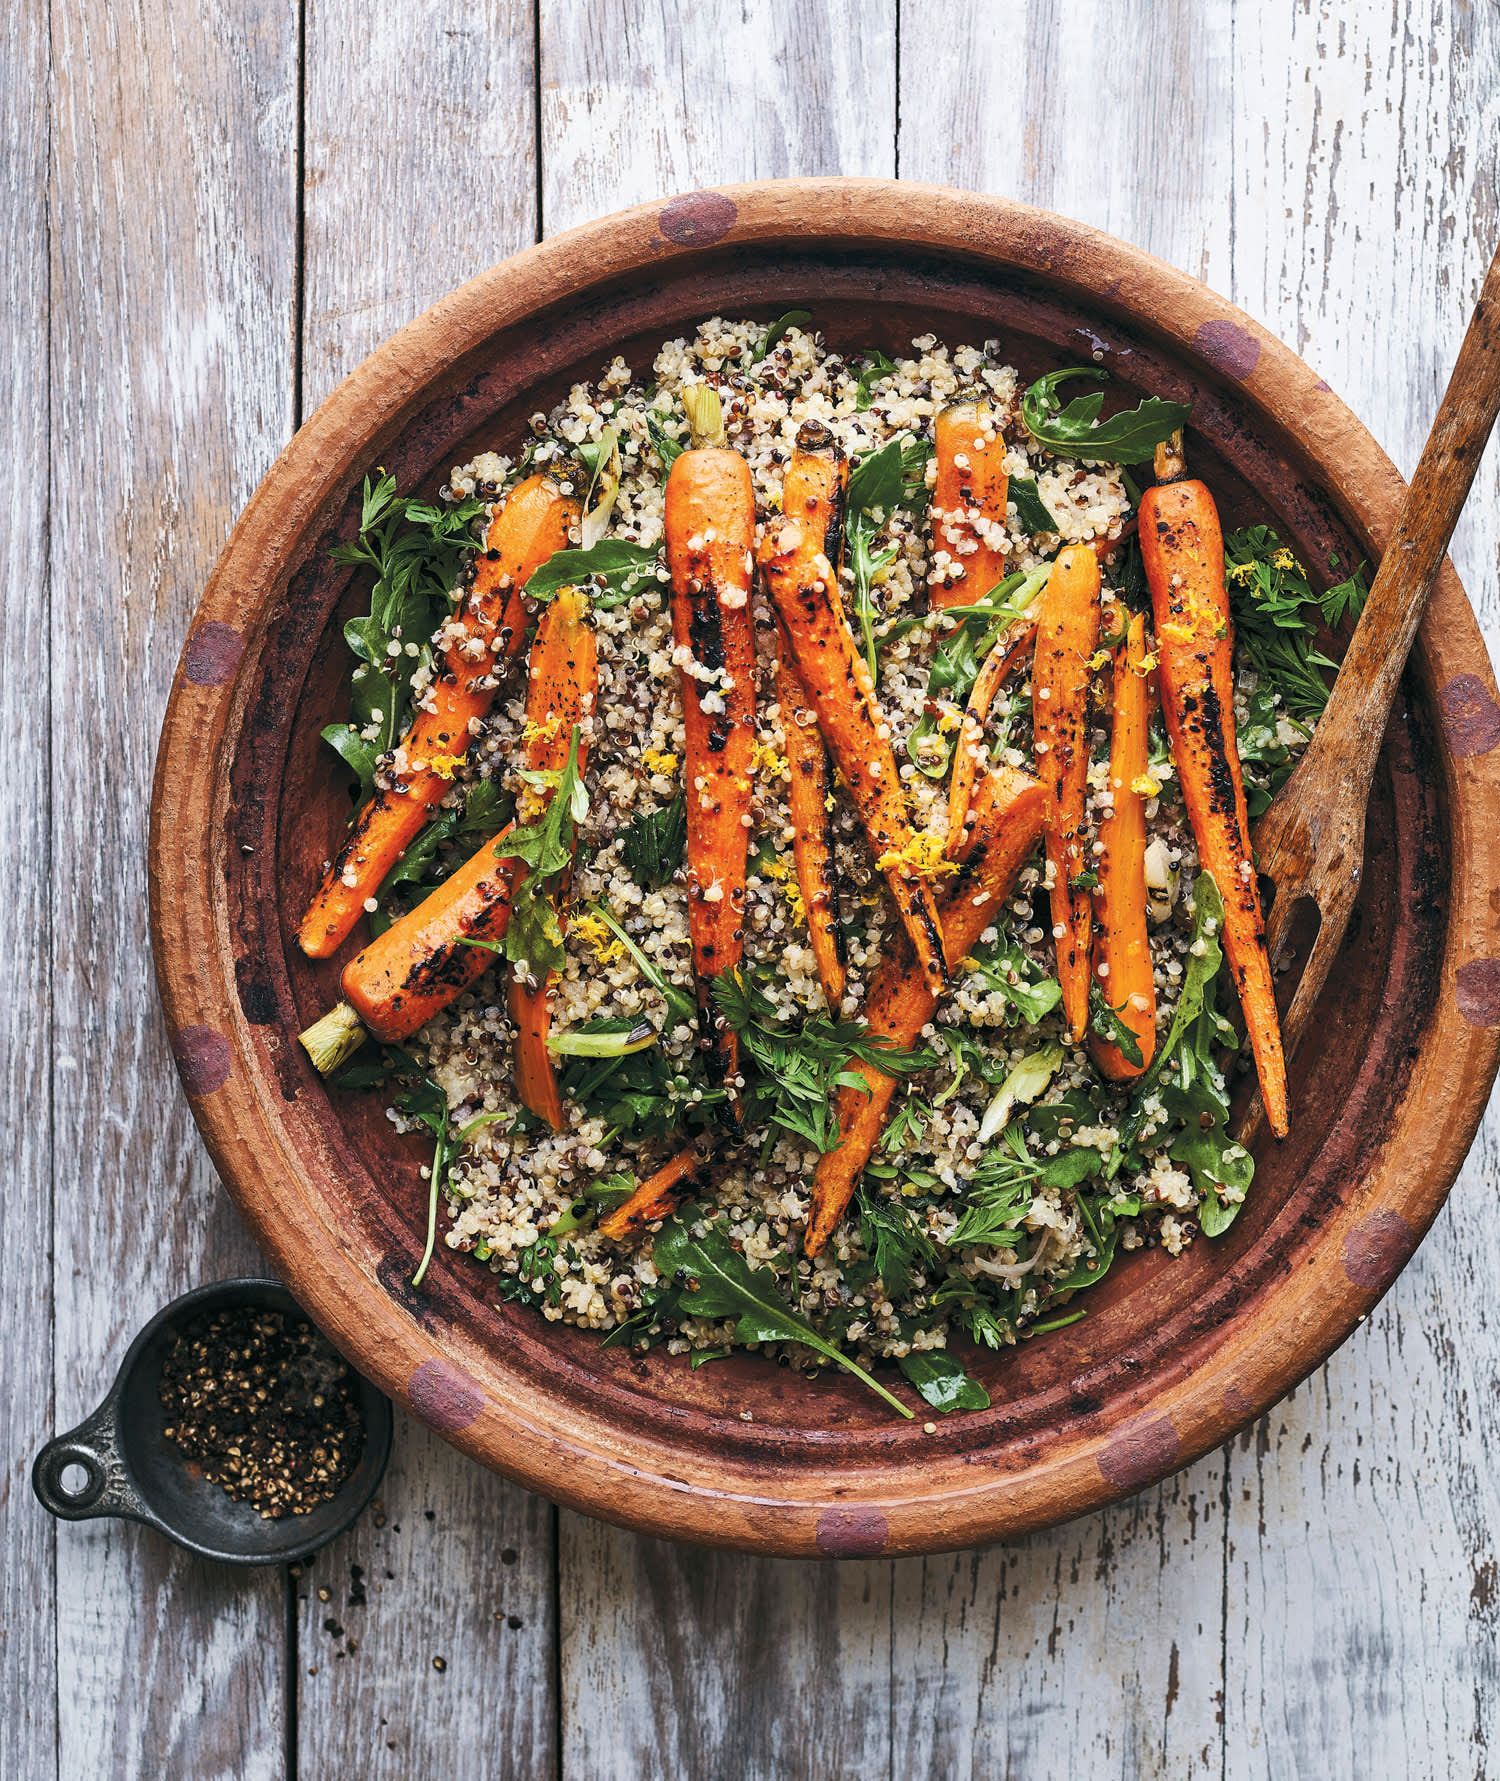 Grilled Quinoa and Carrot Salad with Lemon Vinaigrette Recipe | Kitchn